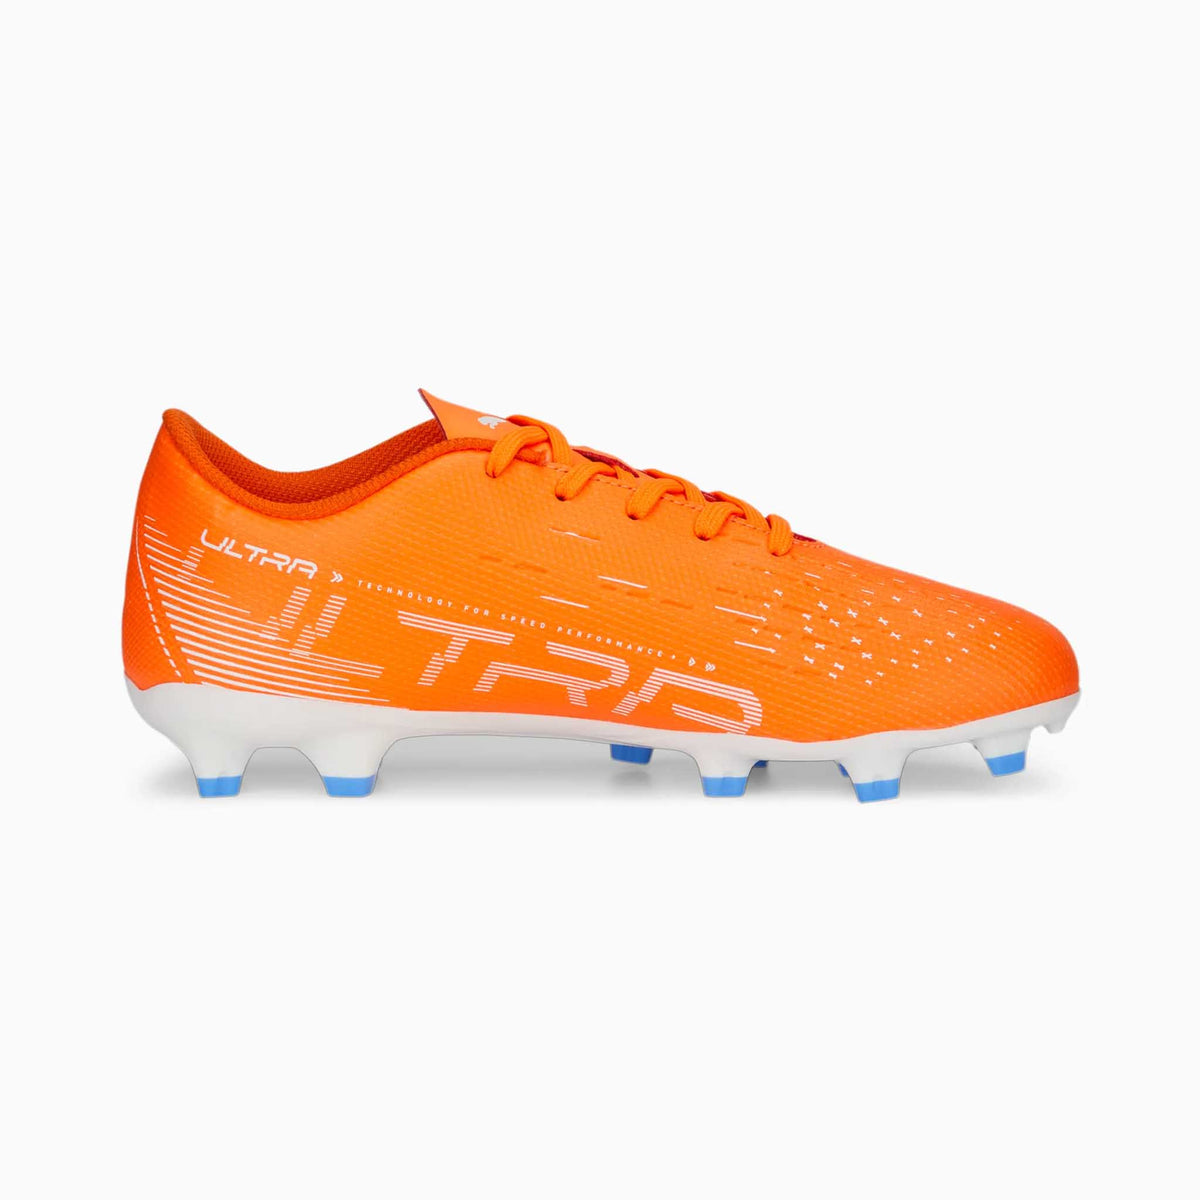 Puma Ultra Play FG/AG souliers soccer crampons enfant lateral- ultra orange